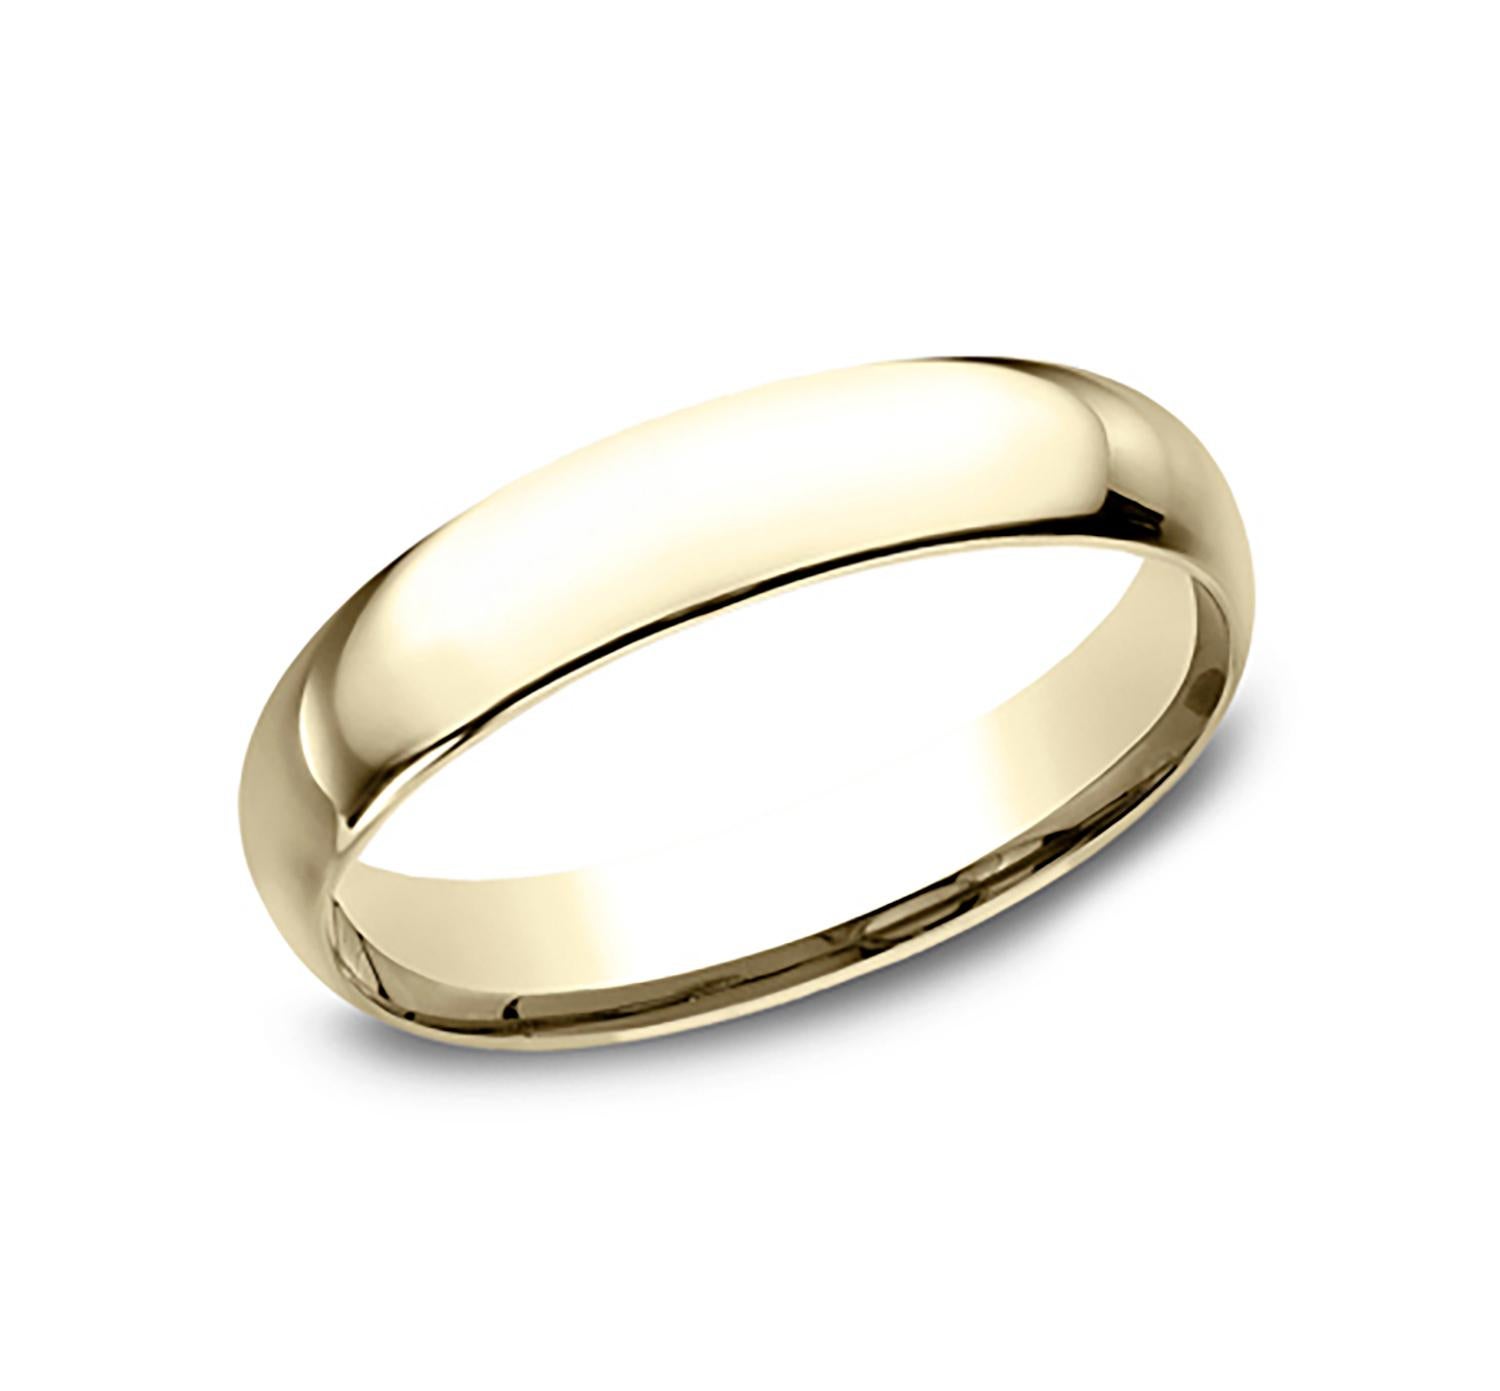 Benchmark wedding band in 14K yellow gold polished finish. Width 4mm, high dome comfort fit. Custom engraving and finishing available. Size 9 US and resizable upon request. Available in 1/4, 1/2 and 3/4 sizes, for more information please message us